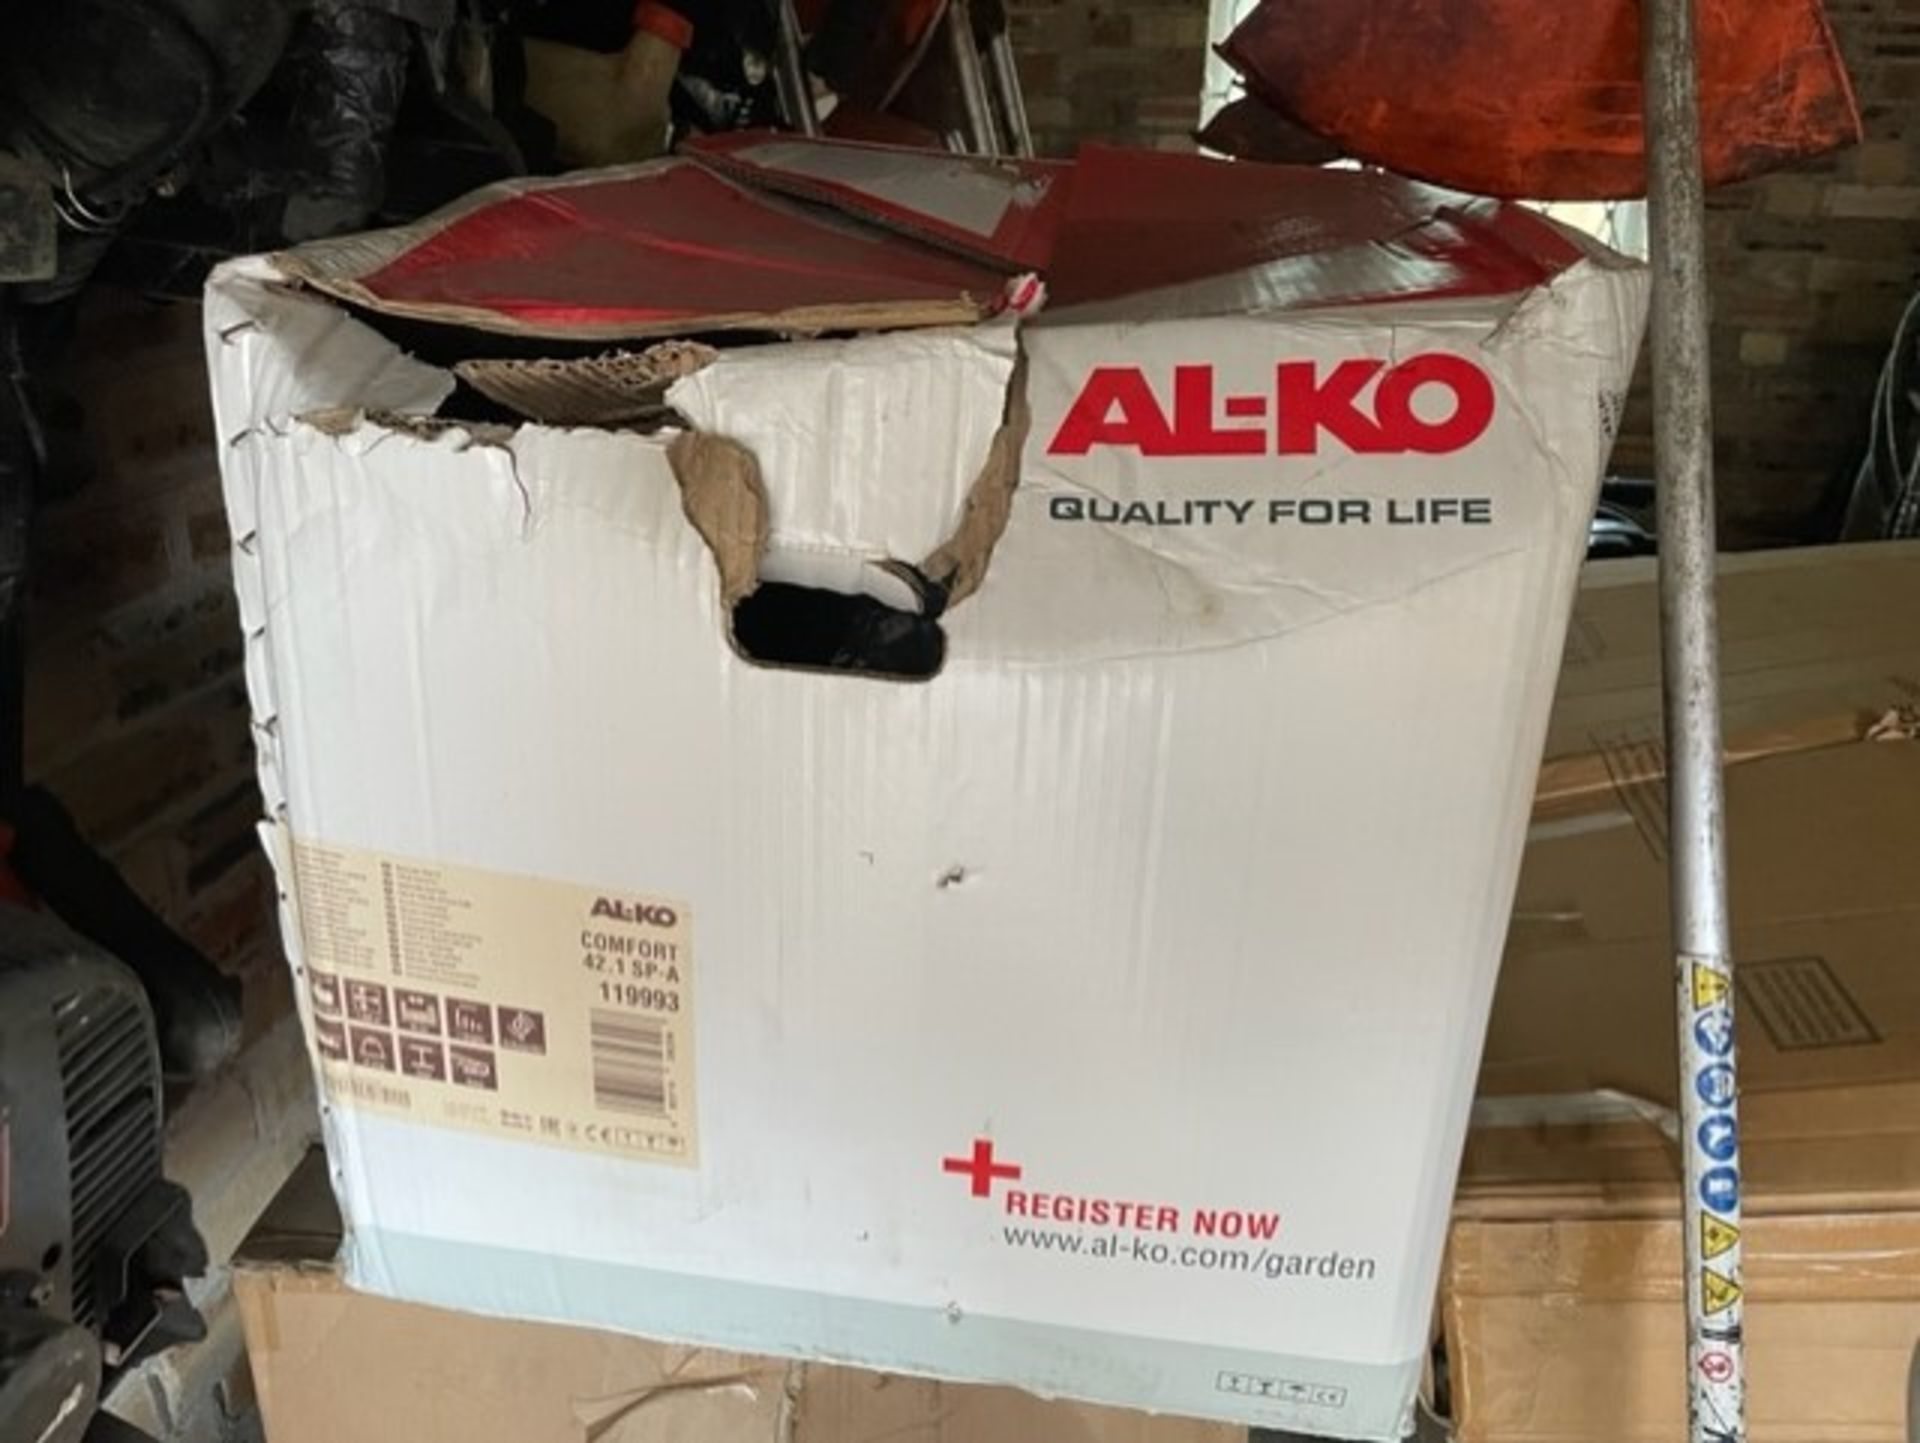 Alko comfort 42.1 sp-A still in box unused over £400 new to purchase